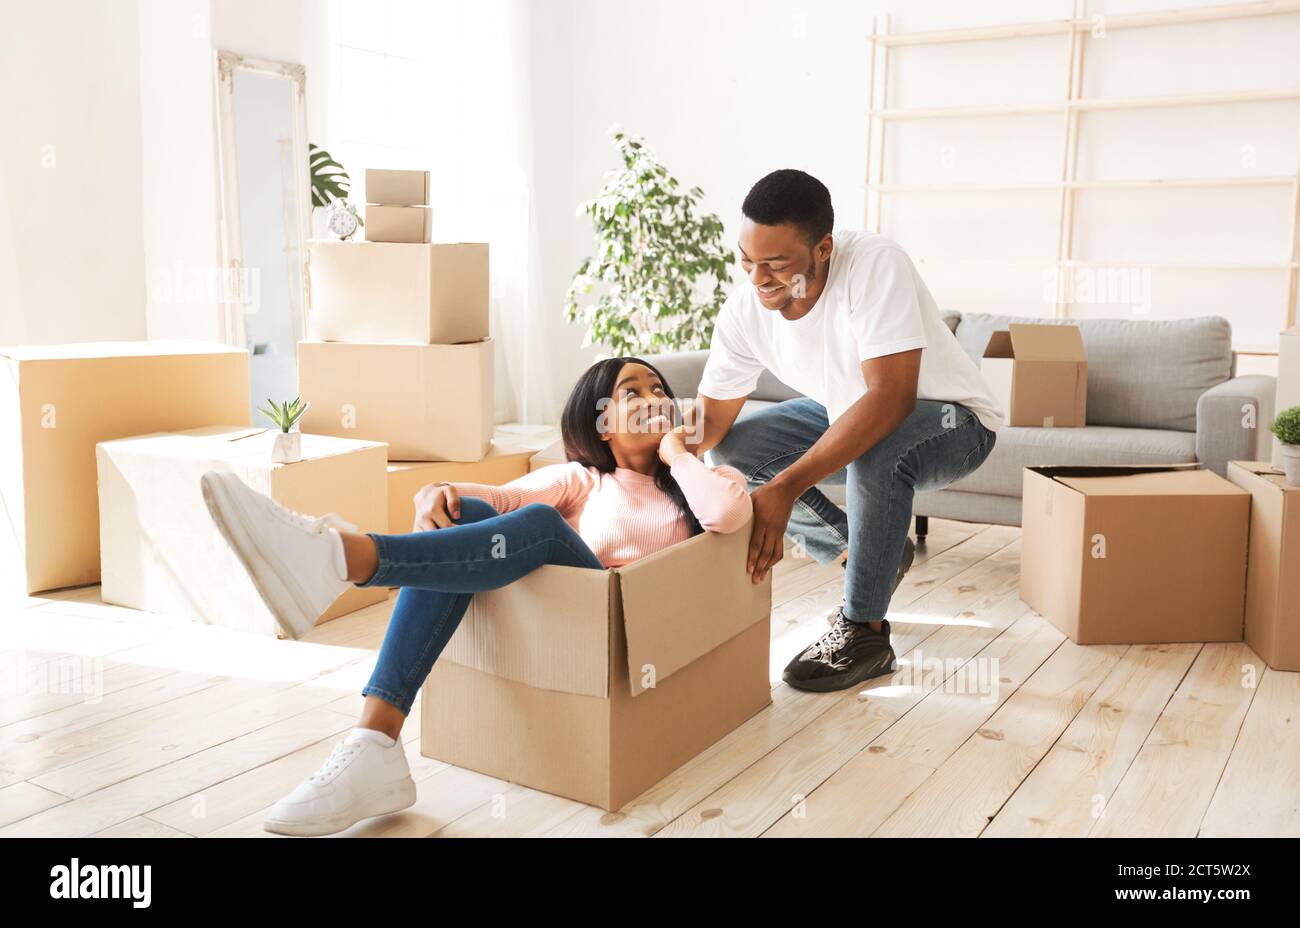 Cheerful African American couple having fun in their new home on moving day Stock Photo